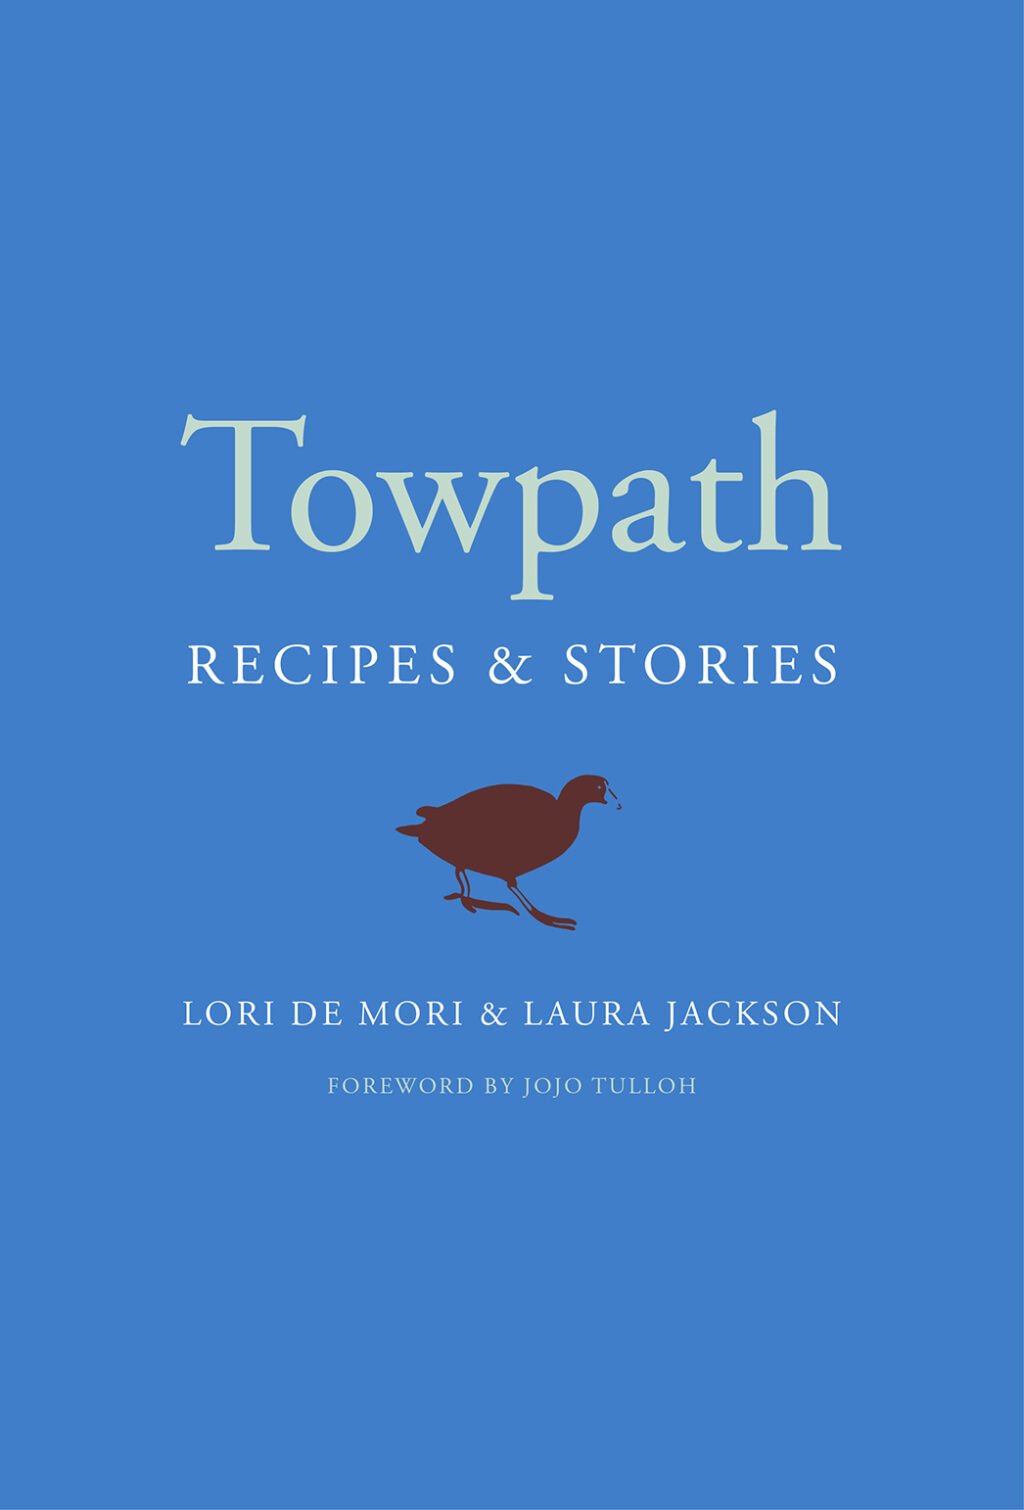 The Towpath cover